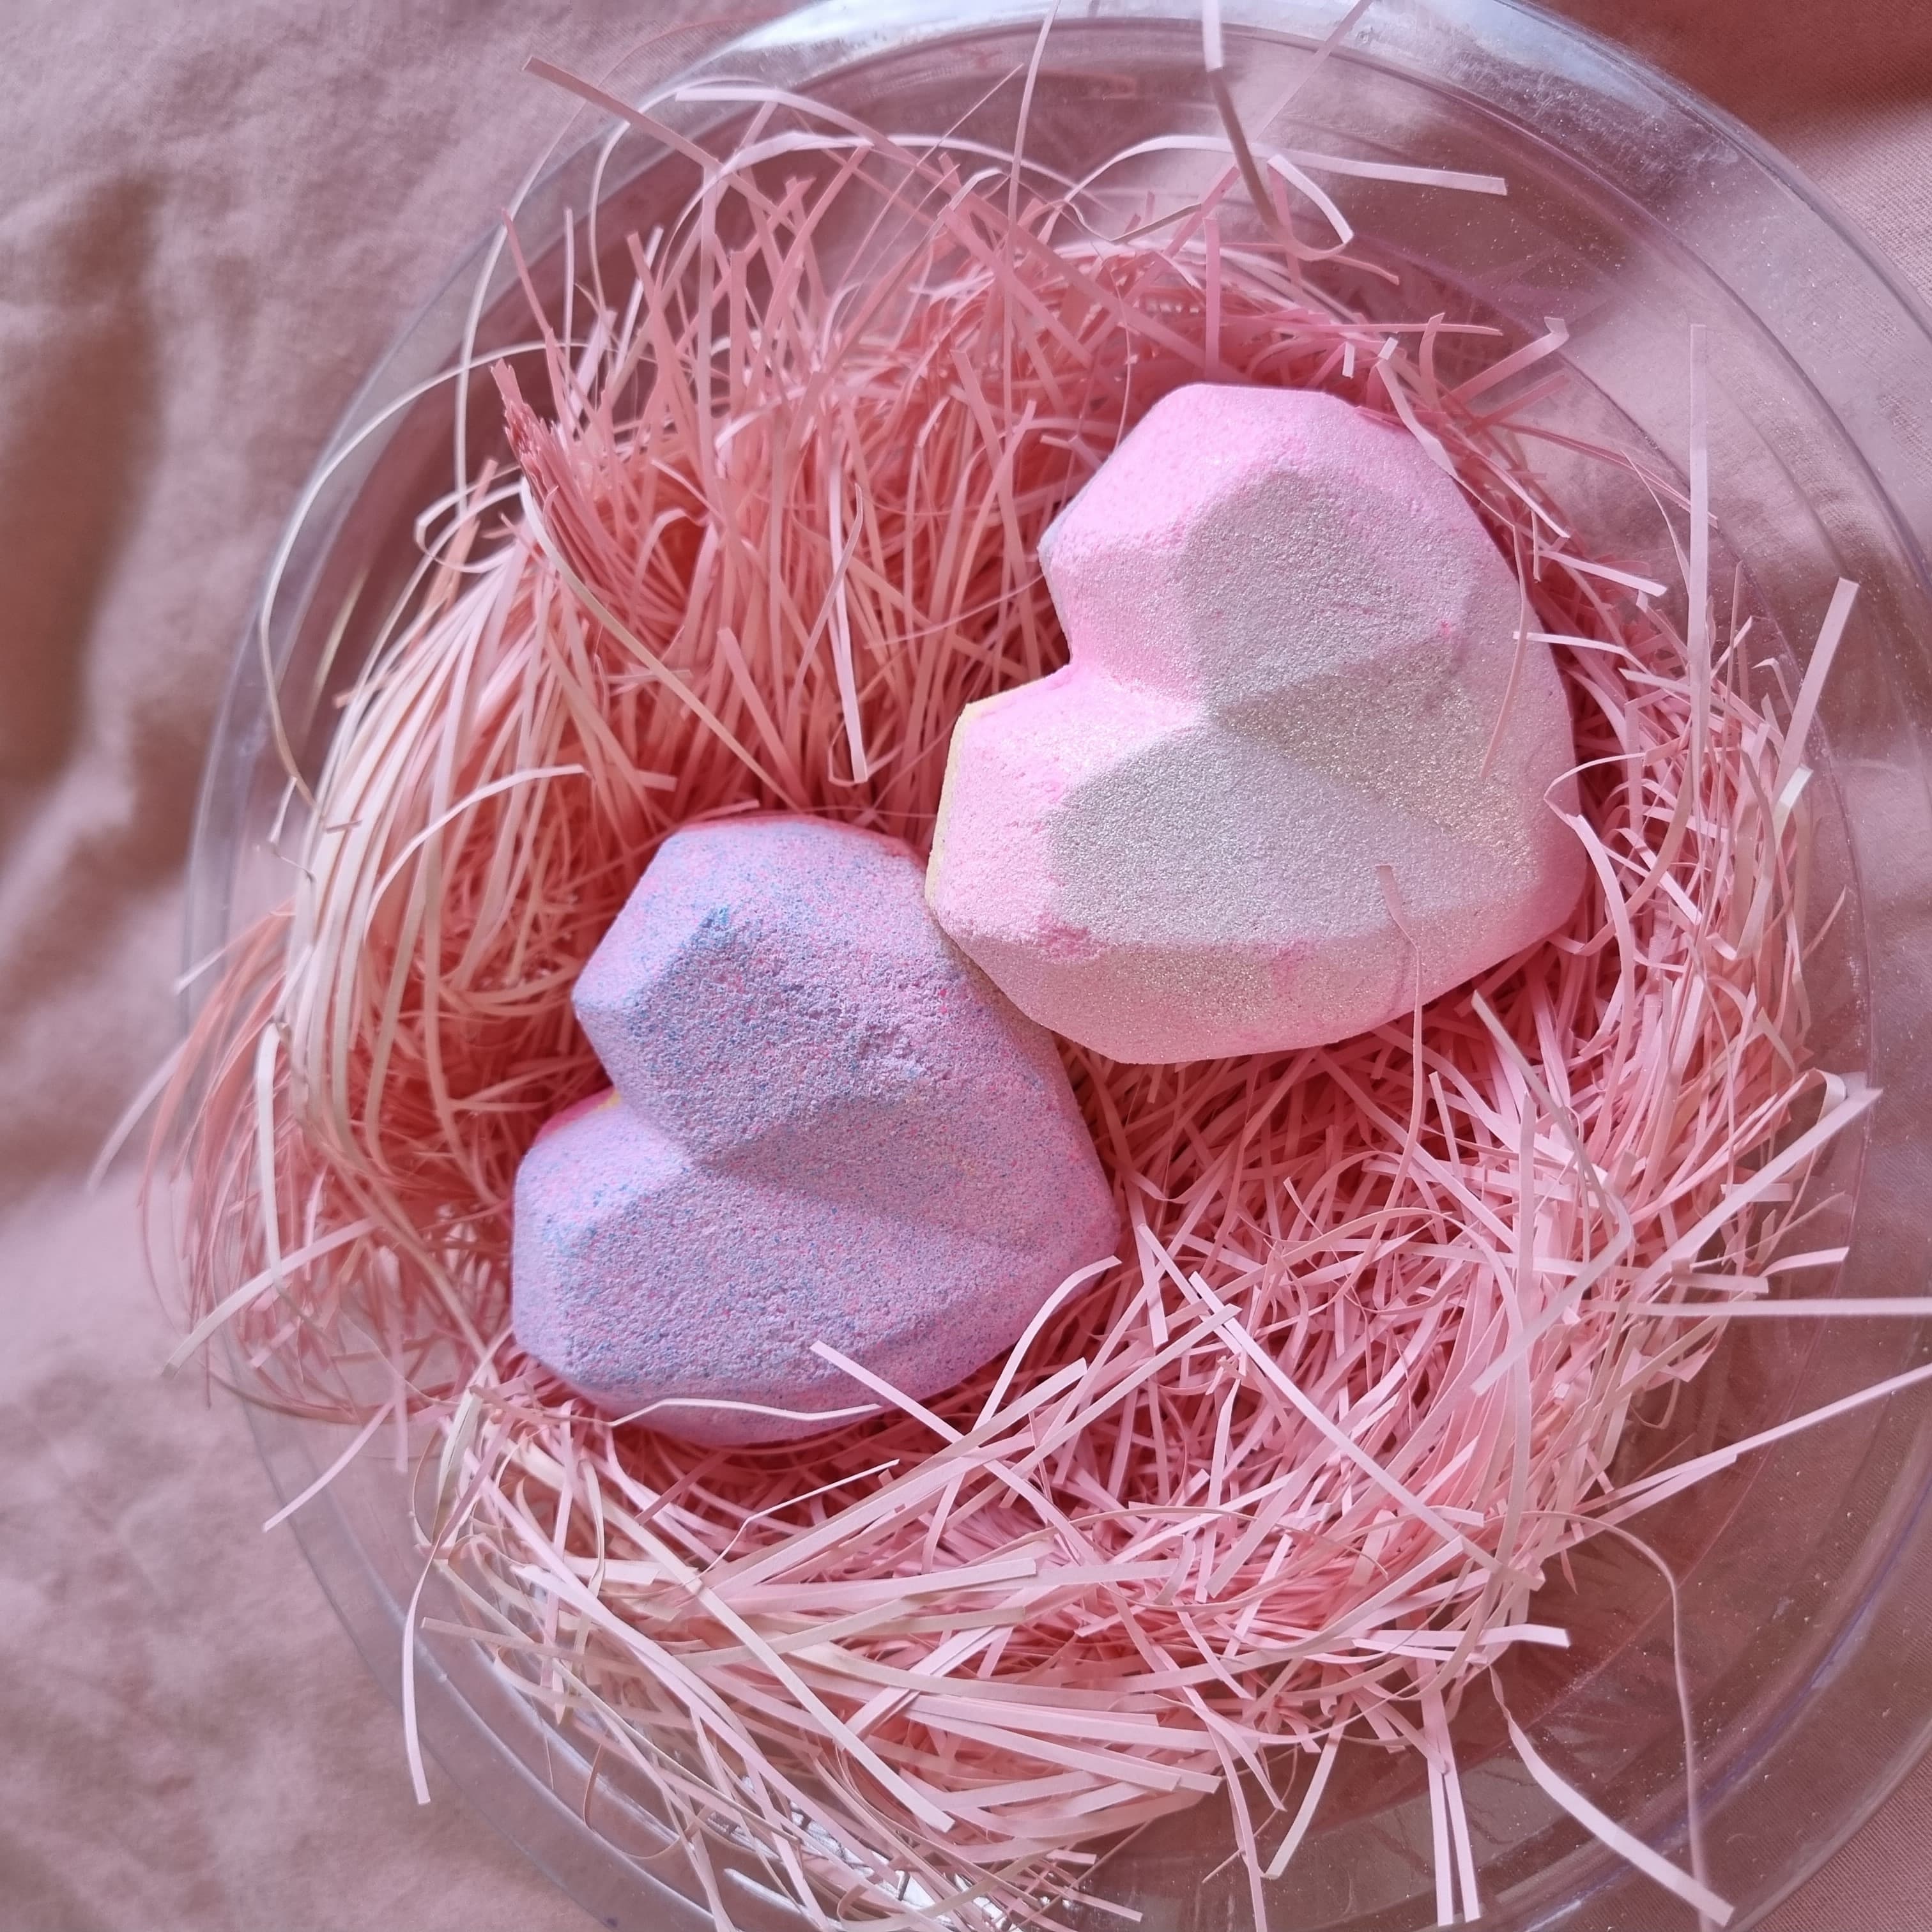 Natural Ingredients Bath Bombs Safe For Every Skin Type Relaxing Bubble Bath